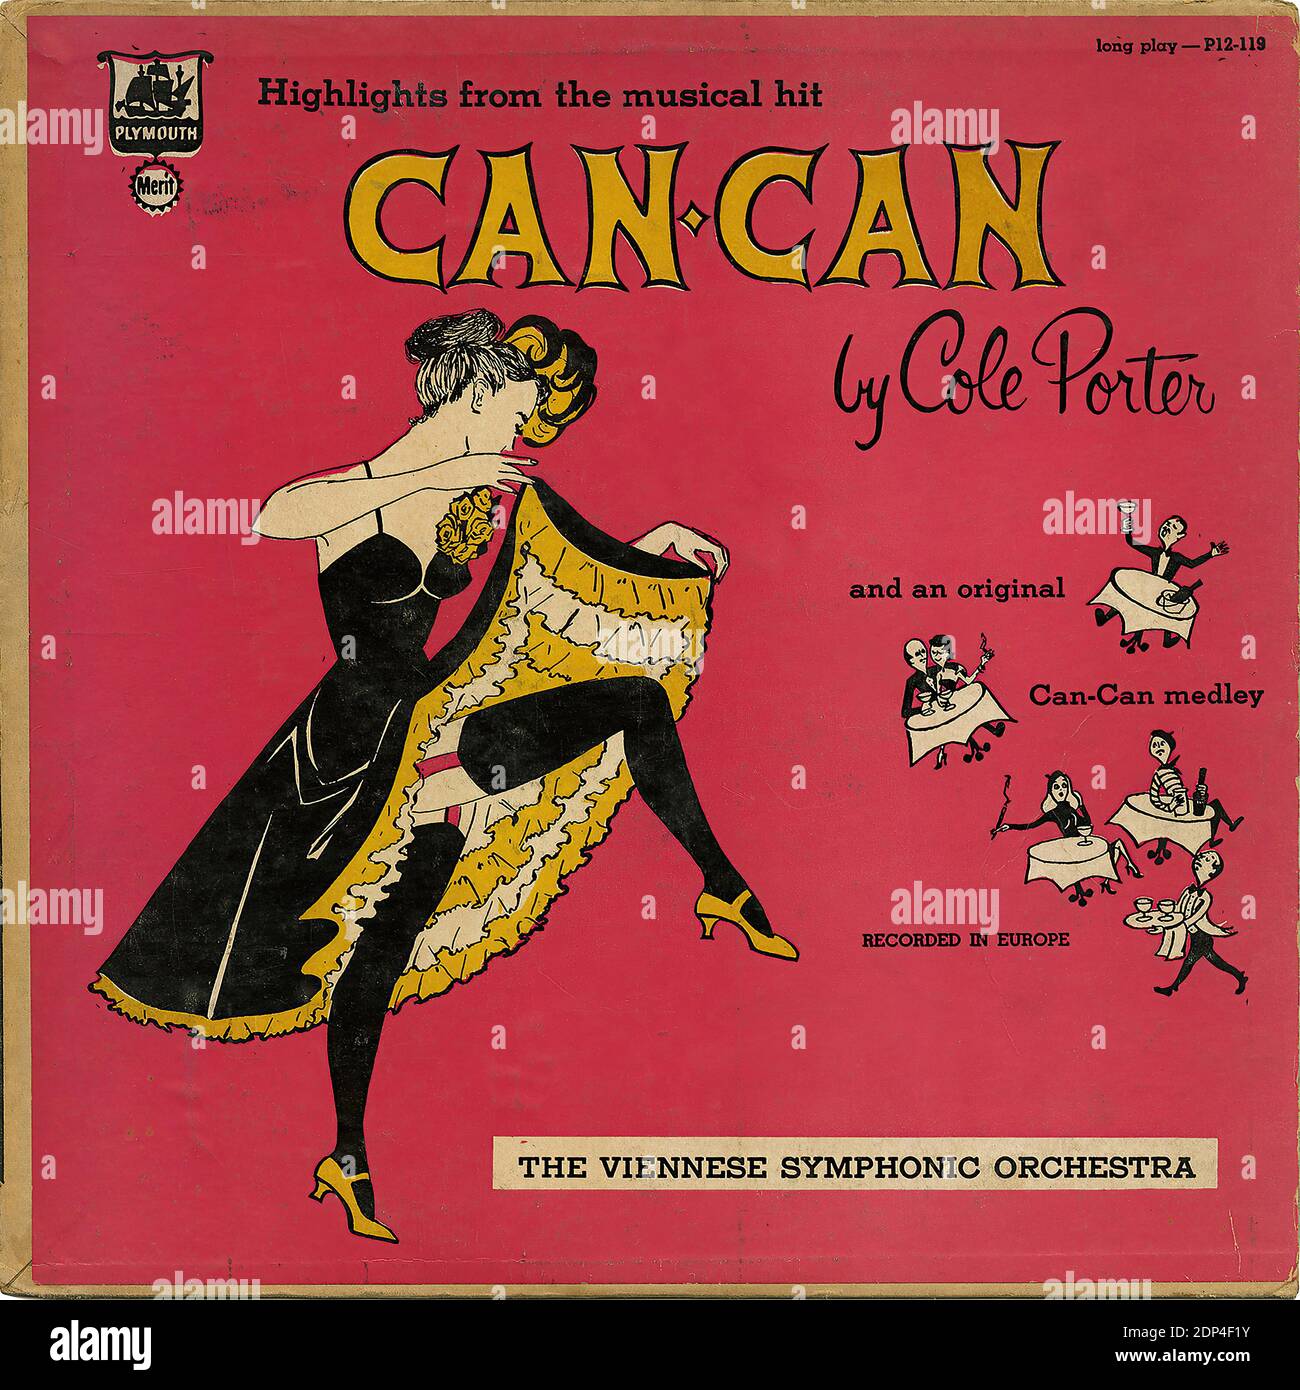 Highlights from the Musical Hit Can Can by Cole Porter - Vintage Record Cover Stock Photo